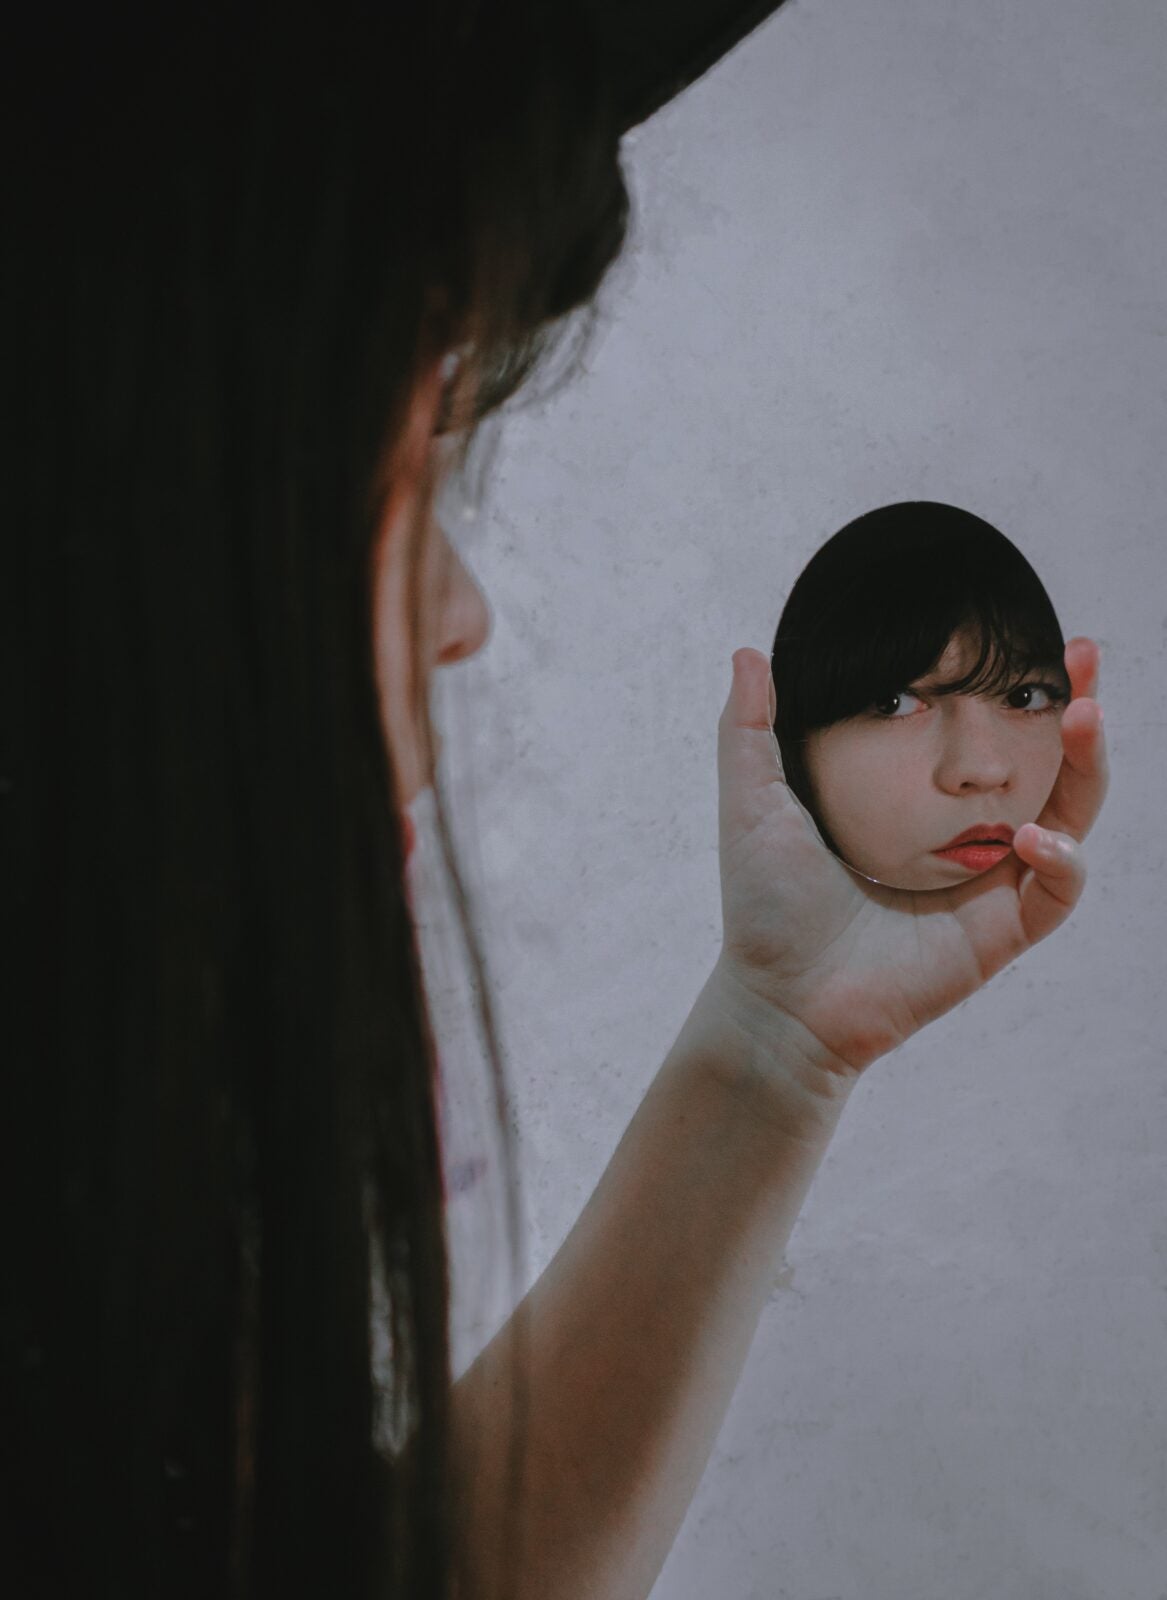 A woman staring at her own reflection through a small, round, hand-held mirror.